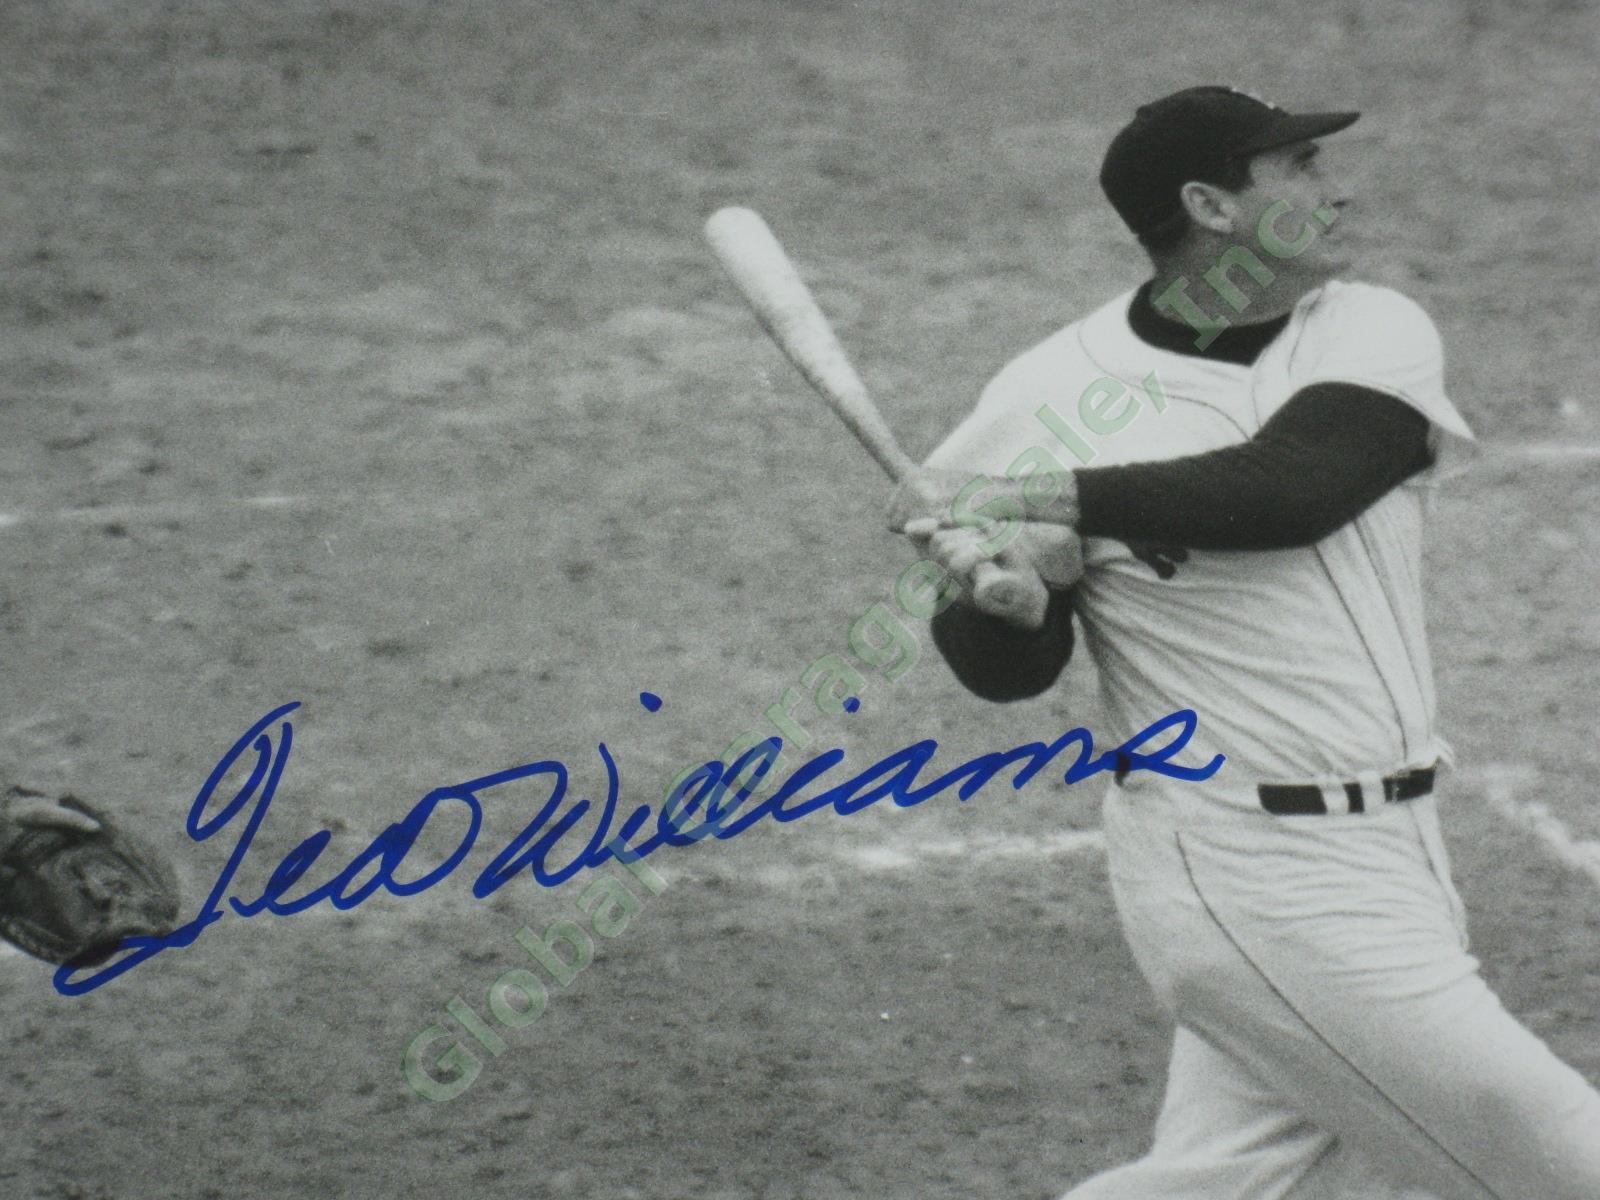 Ted Williams Last Home Run Signed 16"x20" Red Sox Photo w/COA + Yaz Autograph NR 2